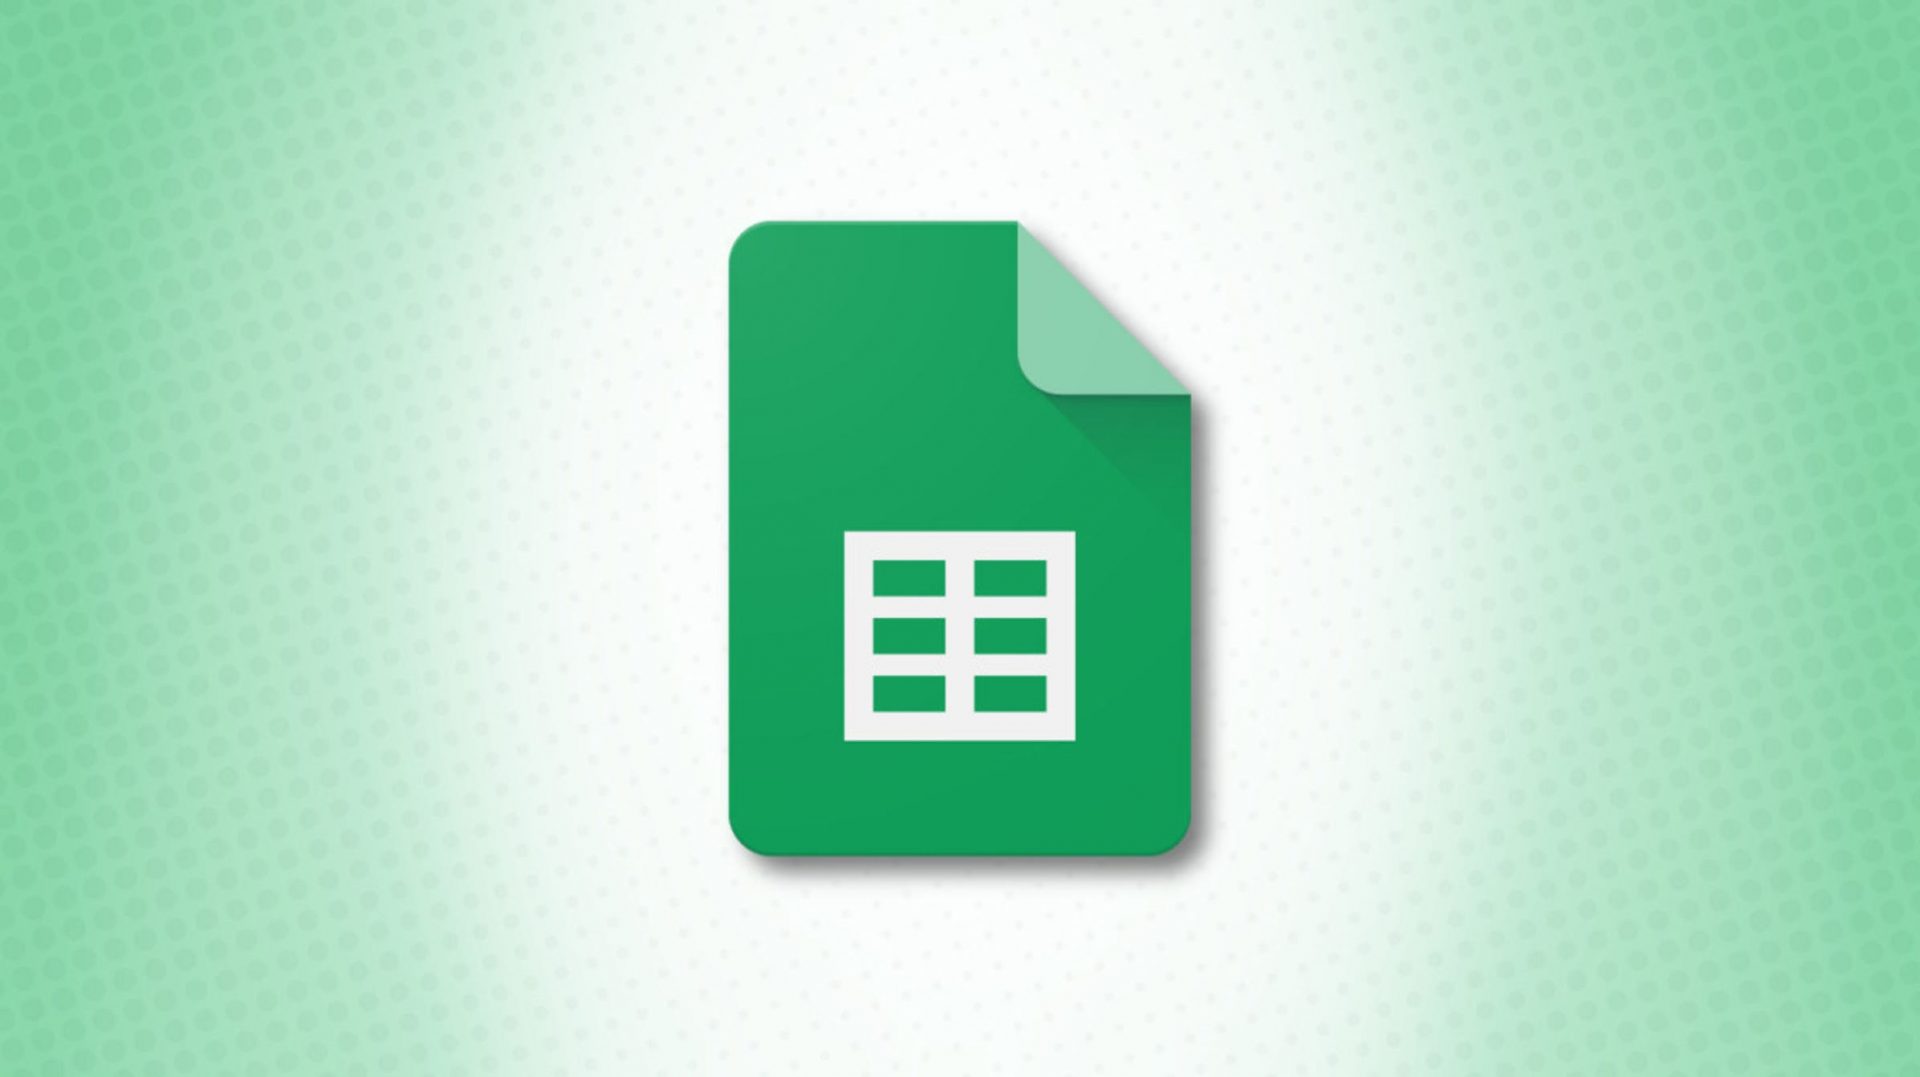 Guidelines on how to Replica or Scoot a Spreadsheet in Google Sheets